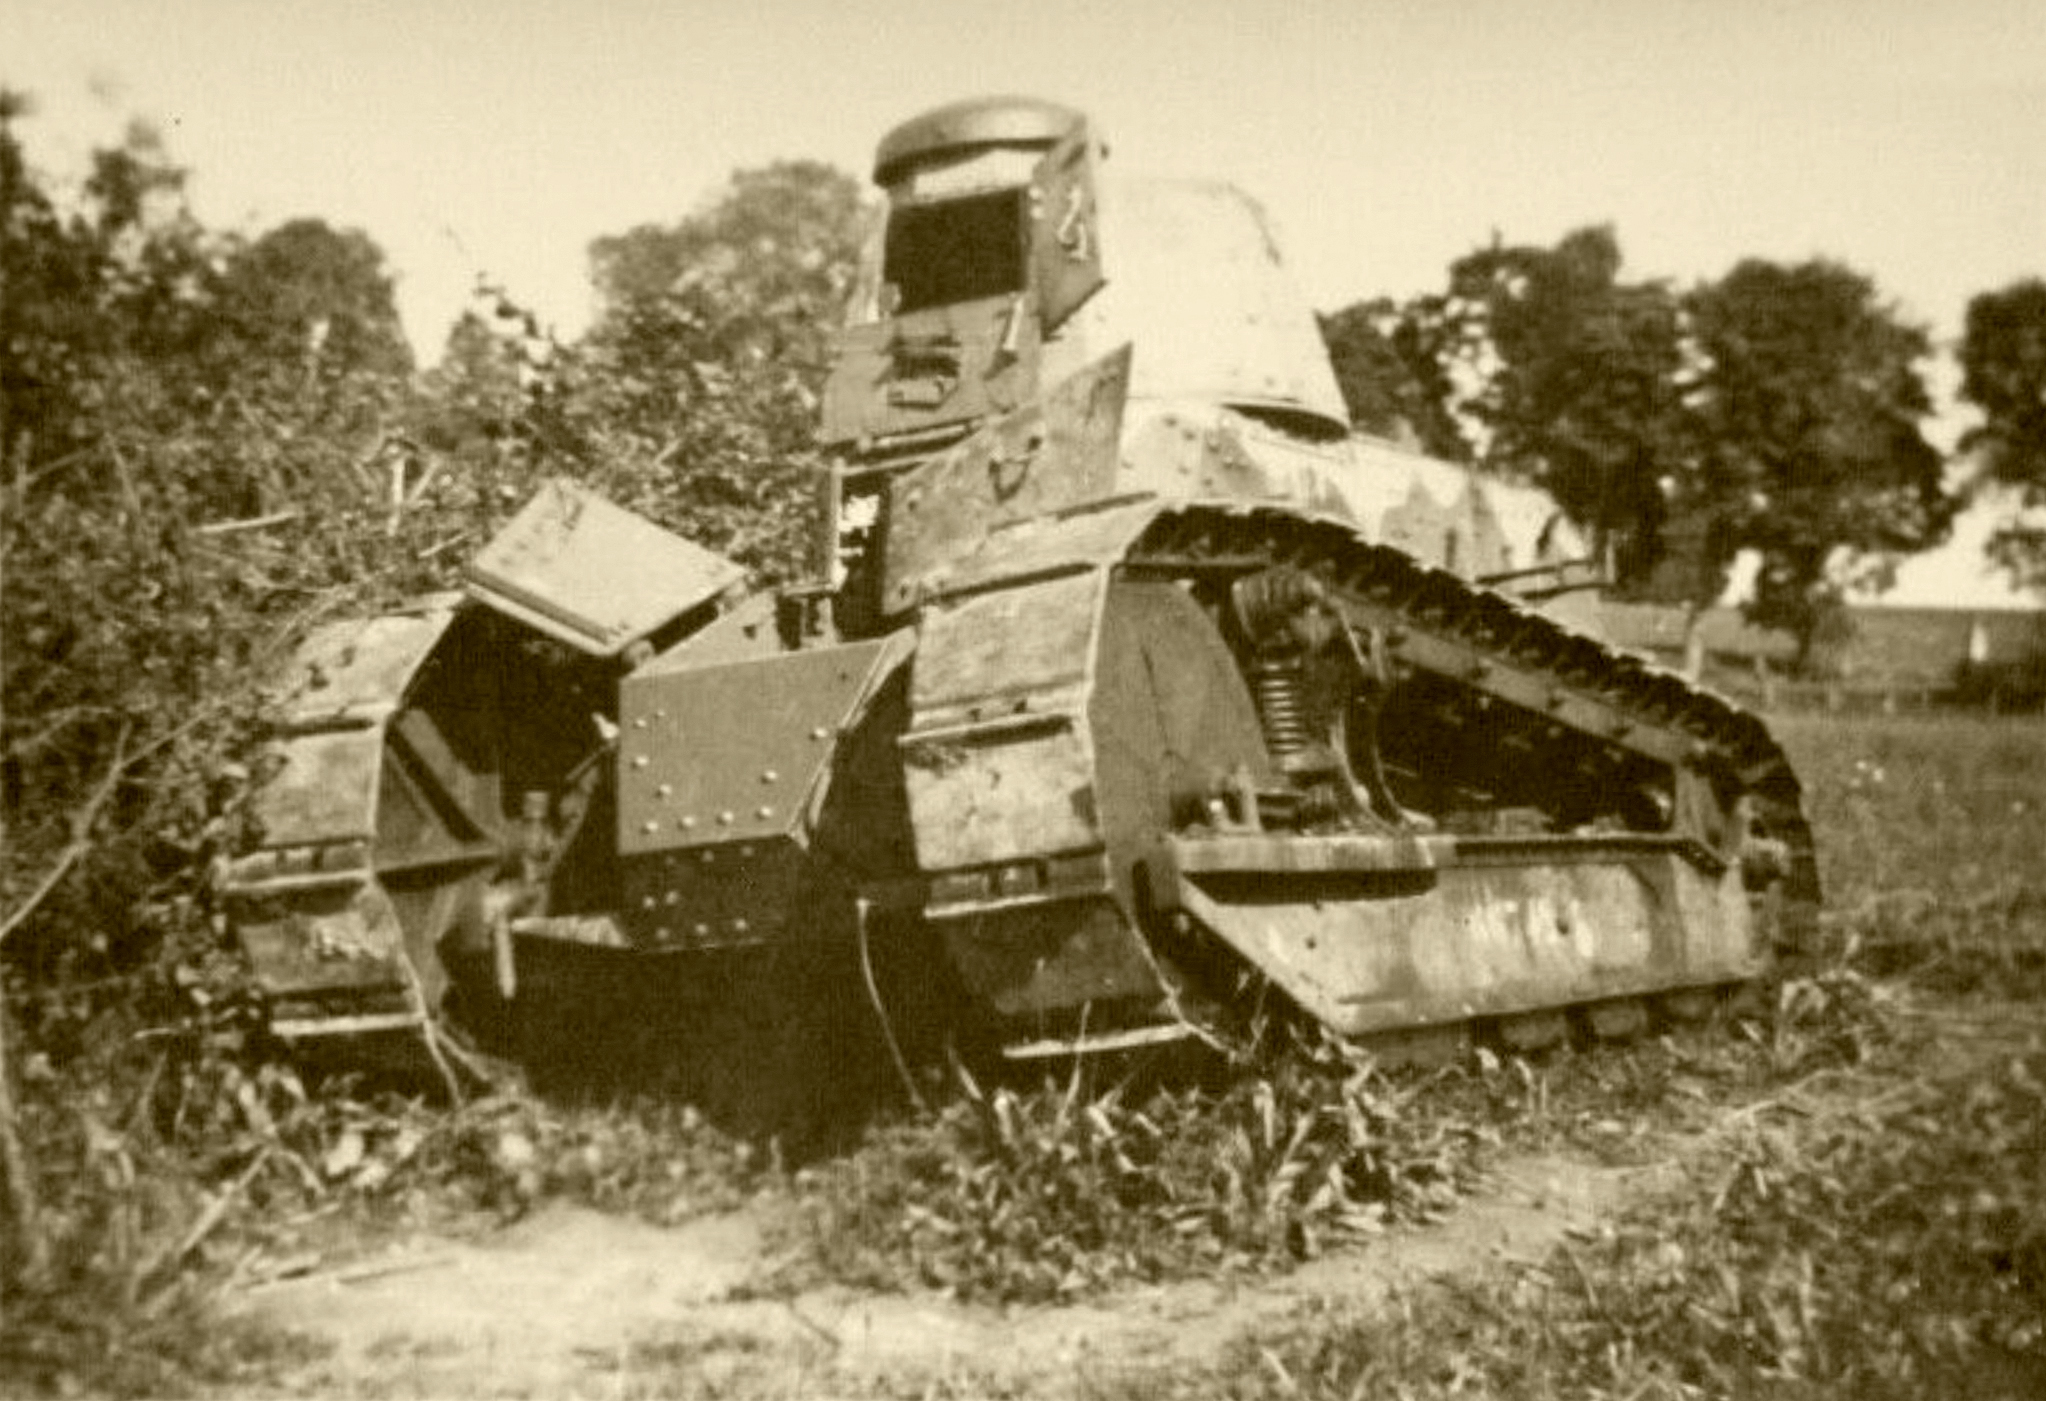 French Army Renault FT 17 captured during the Battle of France 1940 ebay 02